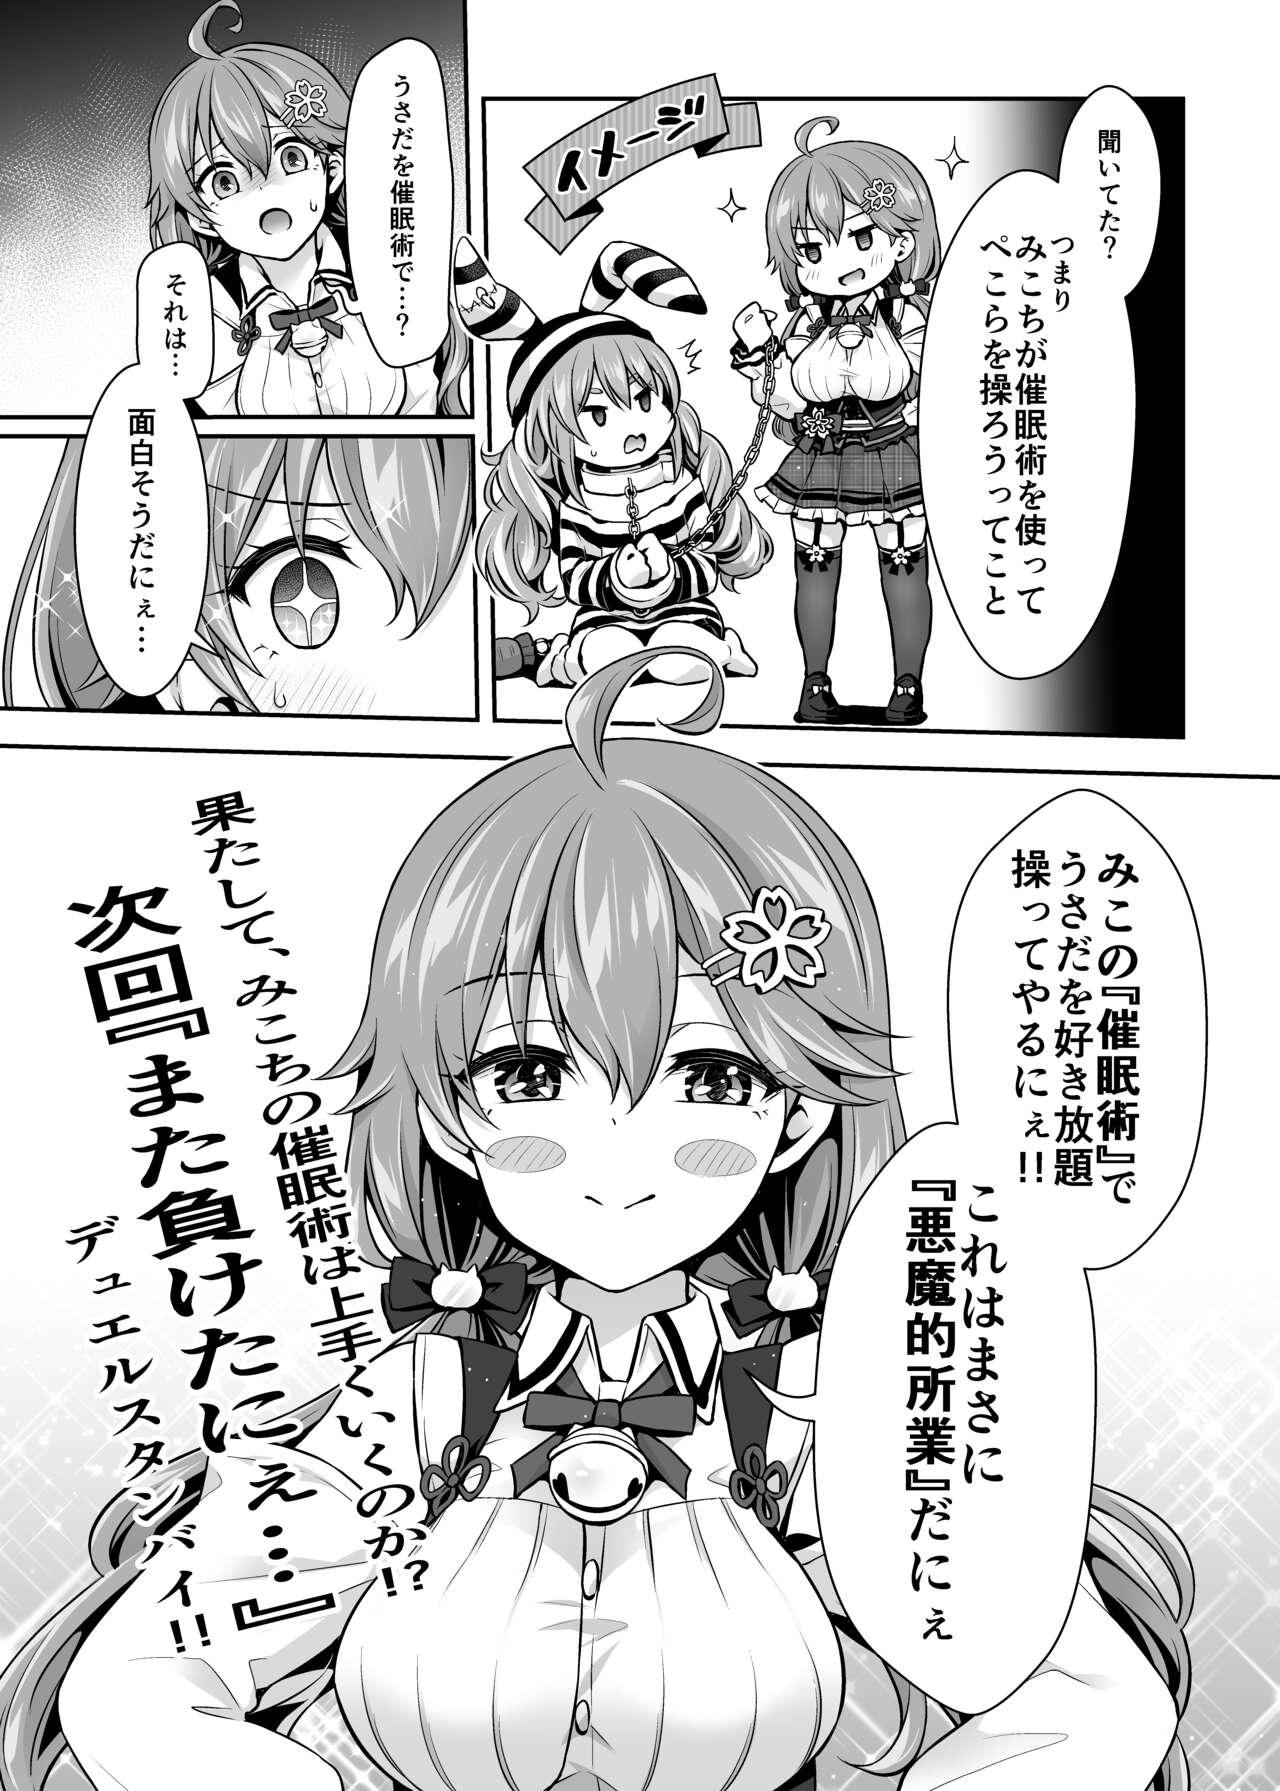 Old みこち催眠えっち本2 ～悪魔的所業編～ - Hololive Teenies - Page 6